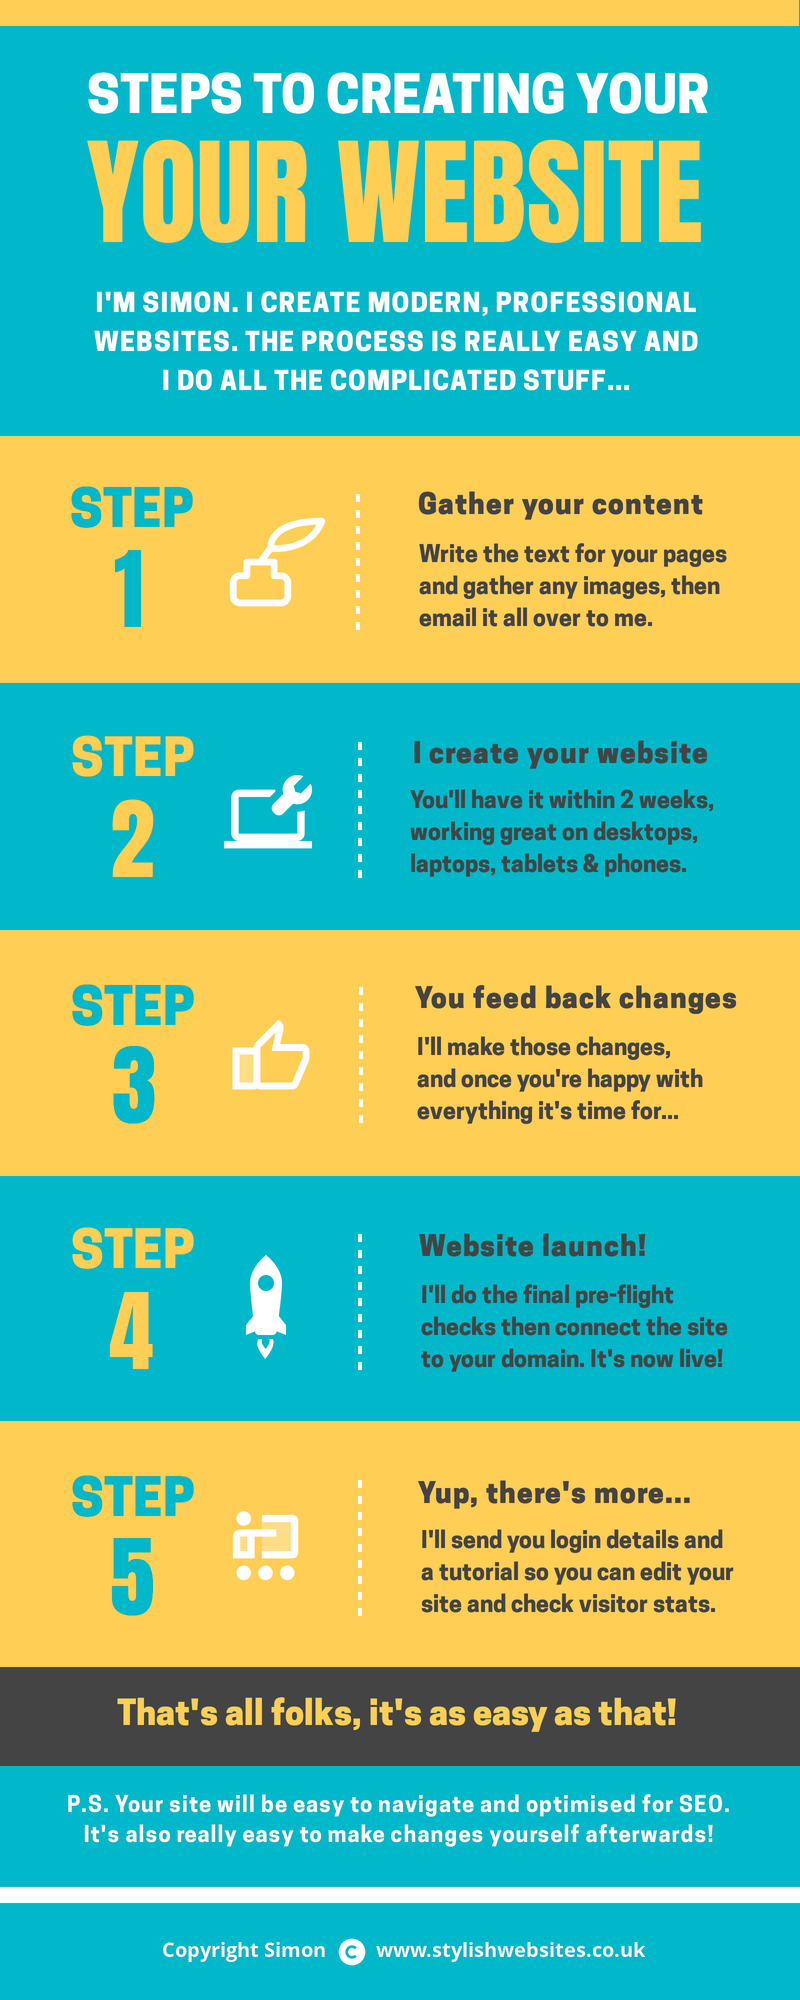 5 Easy Steps To Creating Your Website